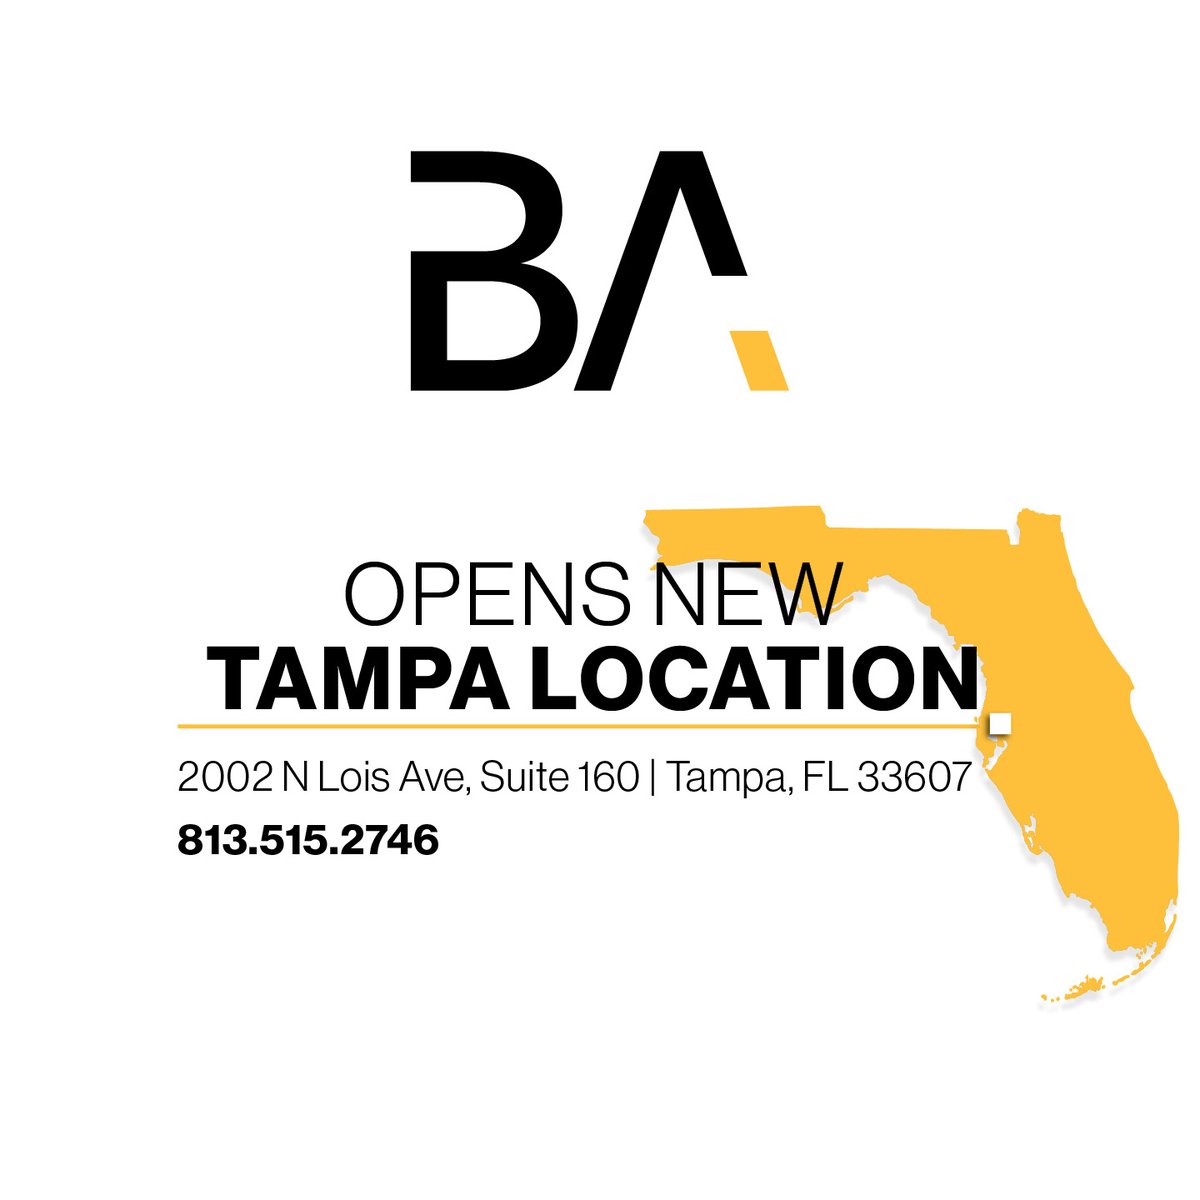 BA announces the opening of new office in Tampa, Florida that will expand capabilities along the west coast and support our established teams in Central Florida.
bermelloajamil.com

#BermelloAjamil #Tampa #FloridaArchitects #FloridaEngineers #BAexpands